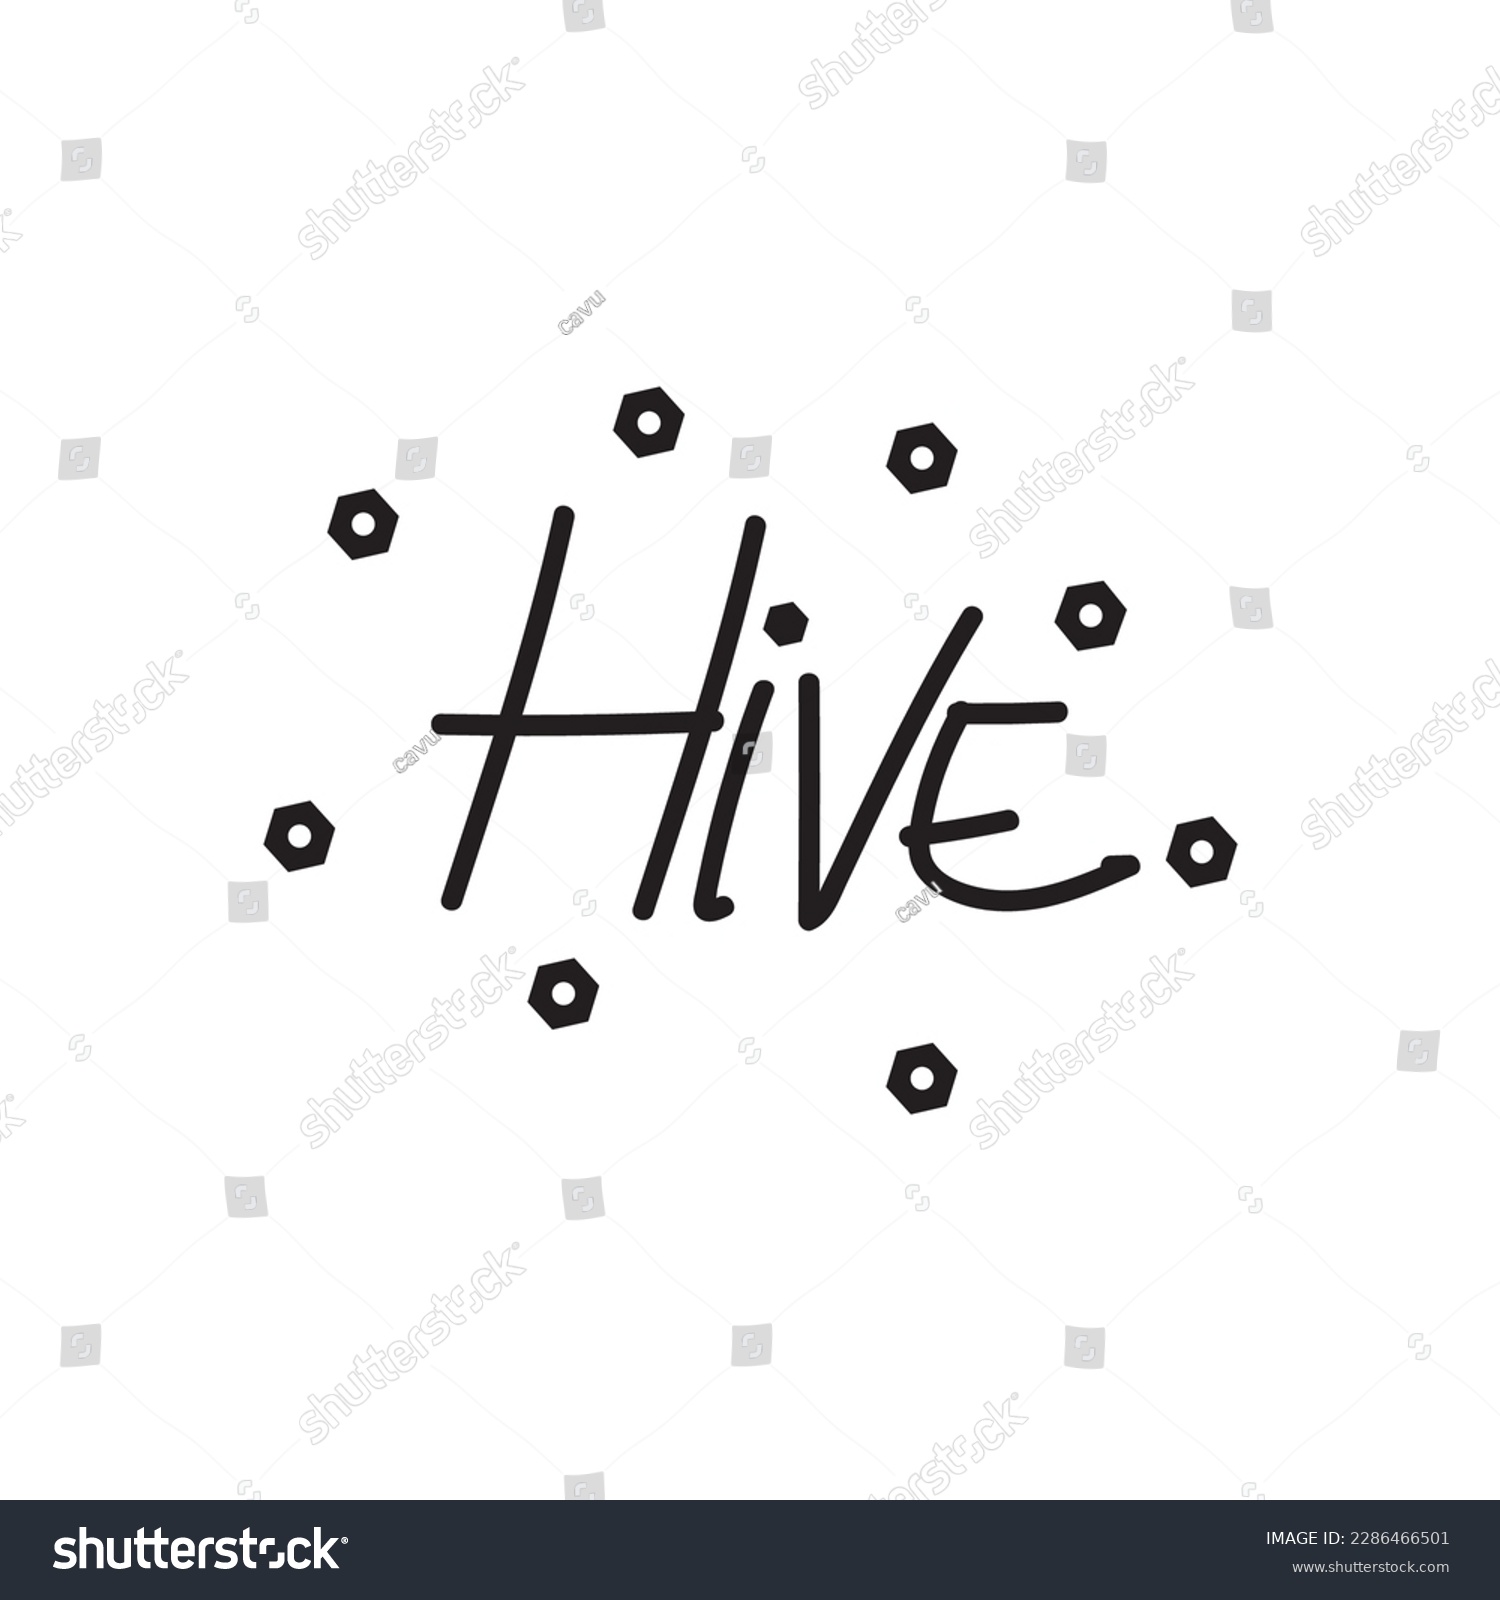 SVG of Hive quote  printing lettering vector design illustration svg